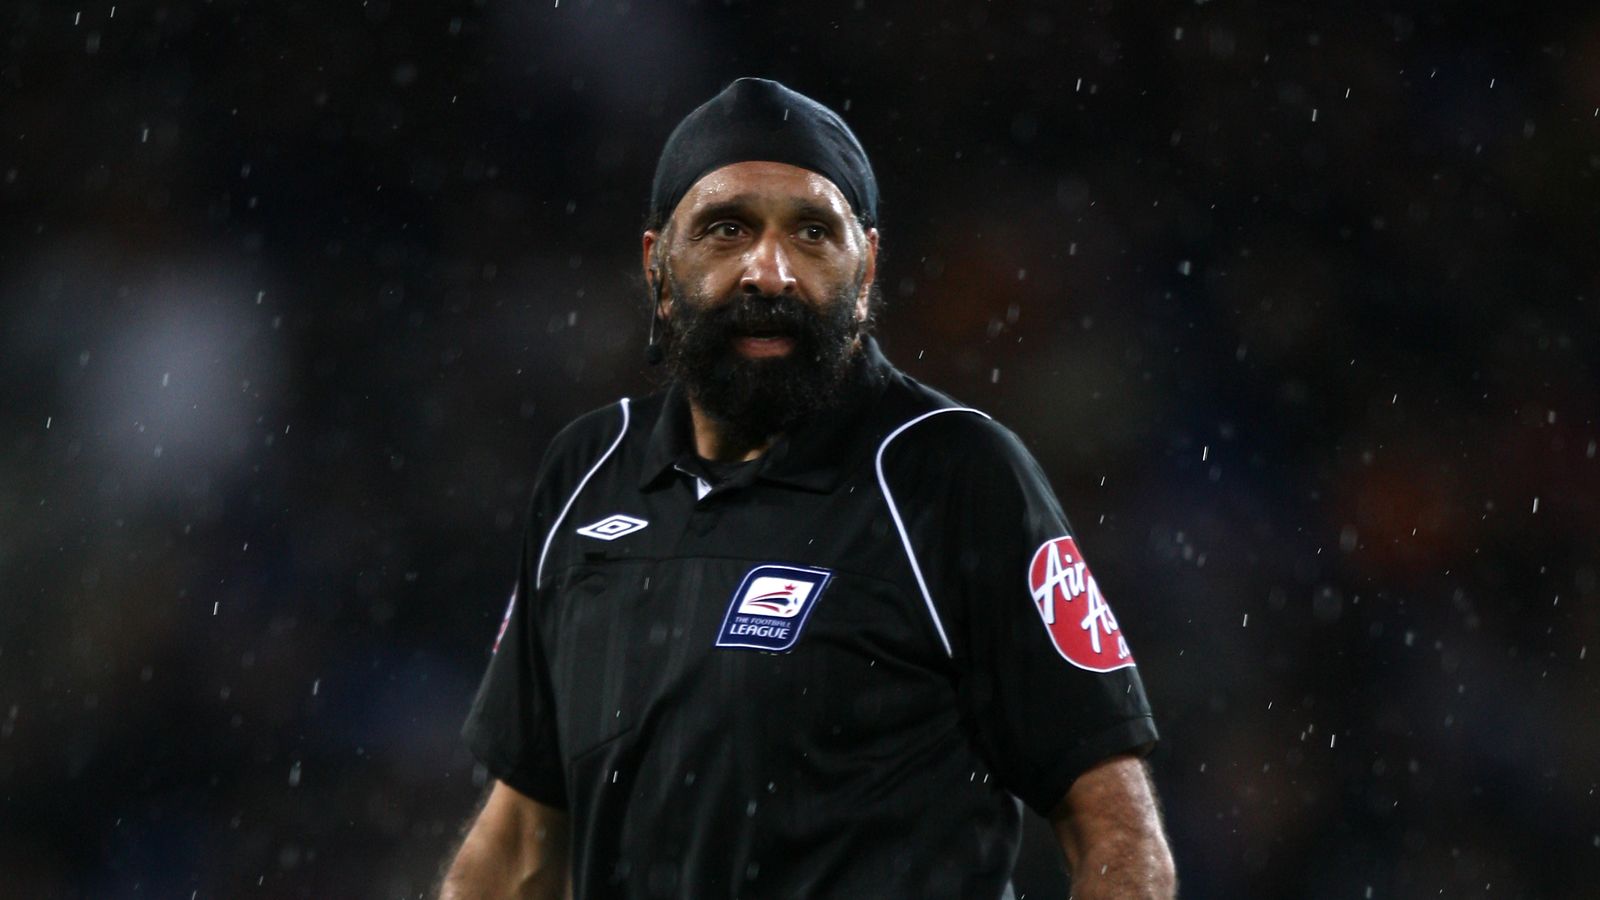 PA - Jarnail Singh refereeing a Championship match between Cardiff City and Ipswich Town in 2009